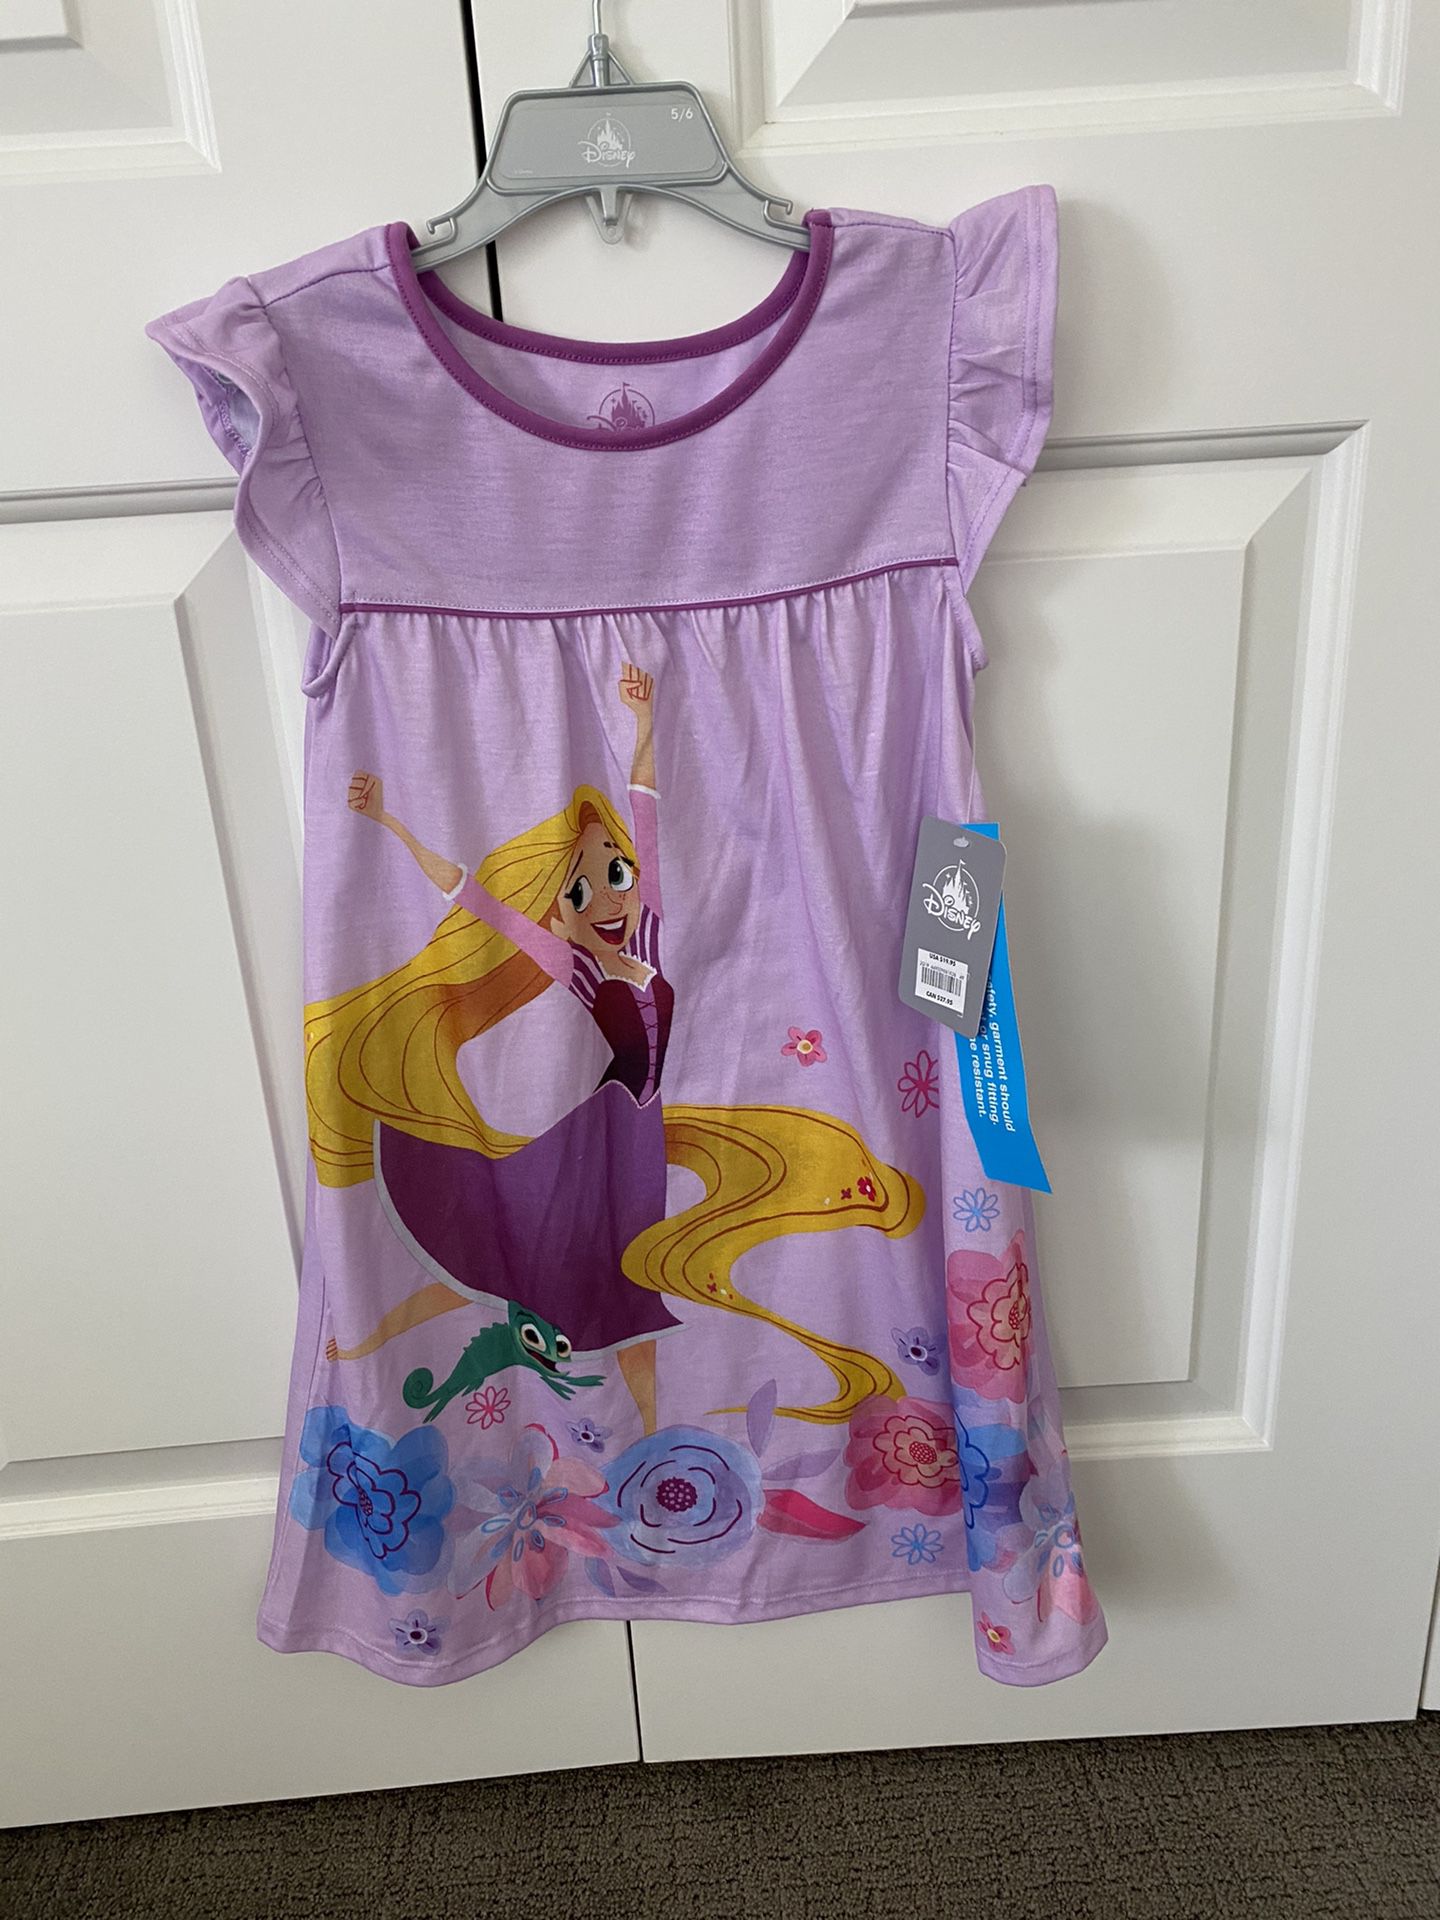 BRAND NEW UNOPENED Disney Rapunzel/Tangled Nightgown, size 5/6